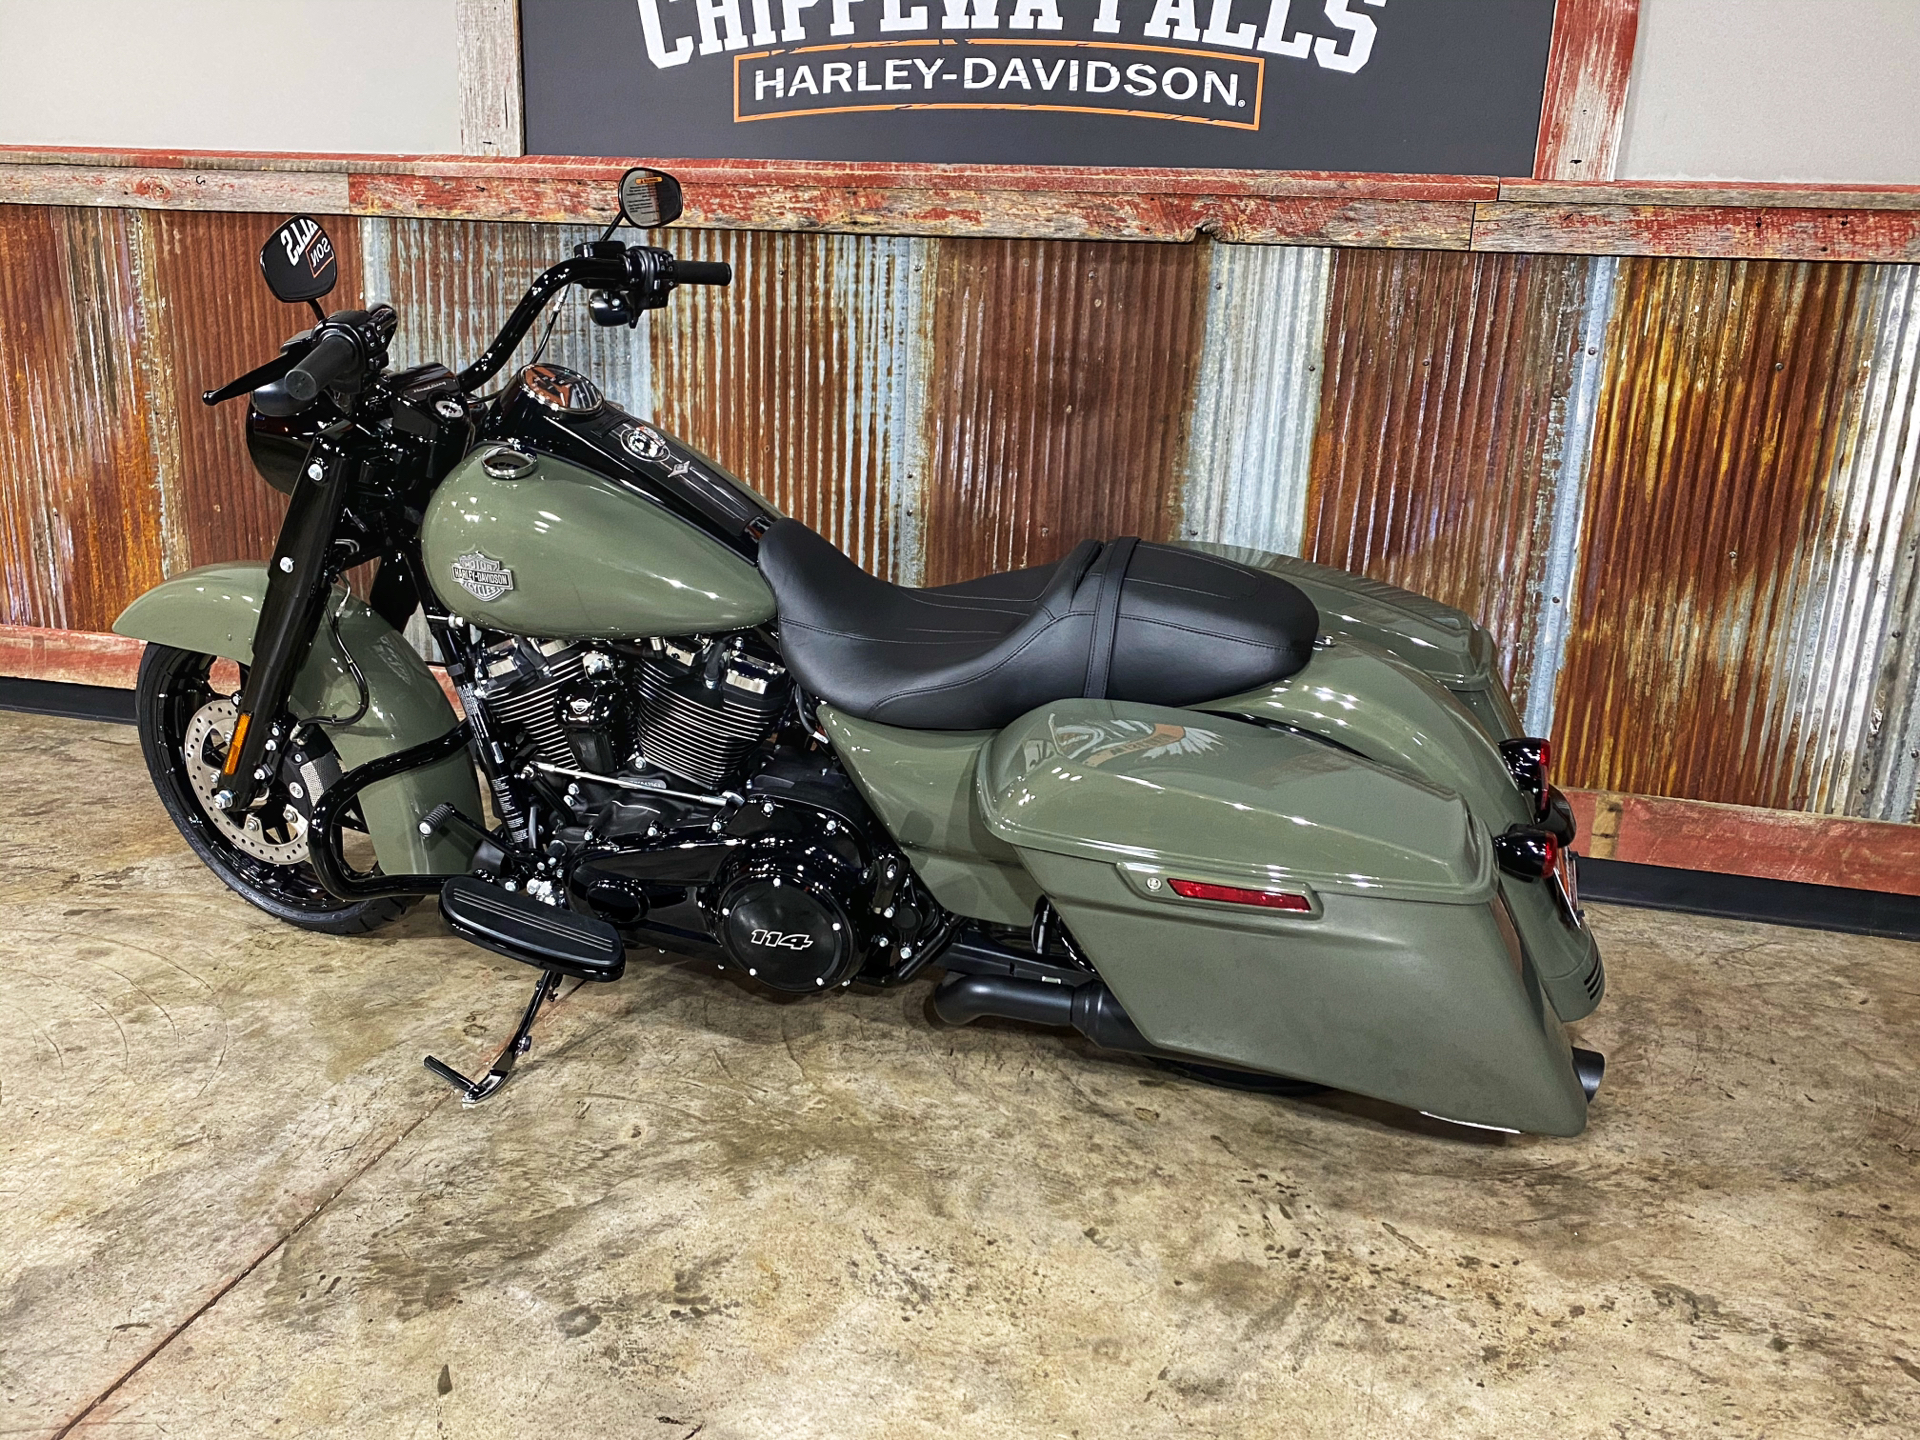 New 2021 Harley Davidson Road King Special Deadwood Green Motorcycles In Chippewa Falls Wi Fl604396